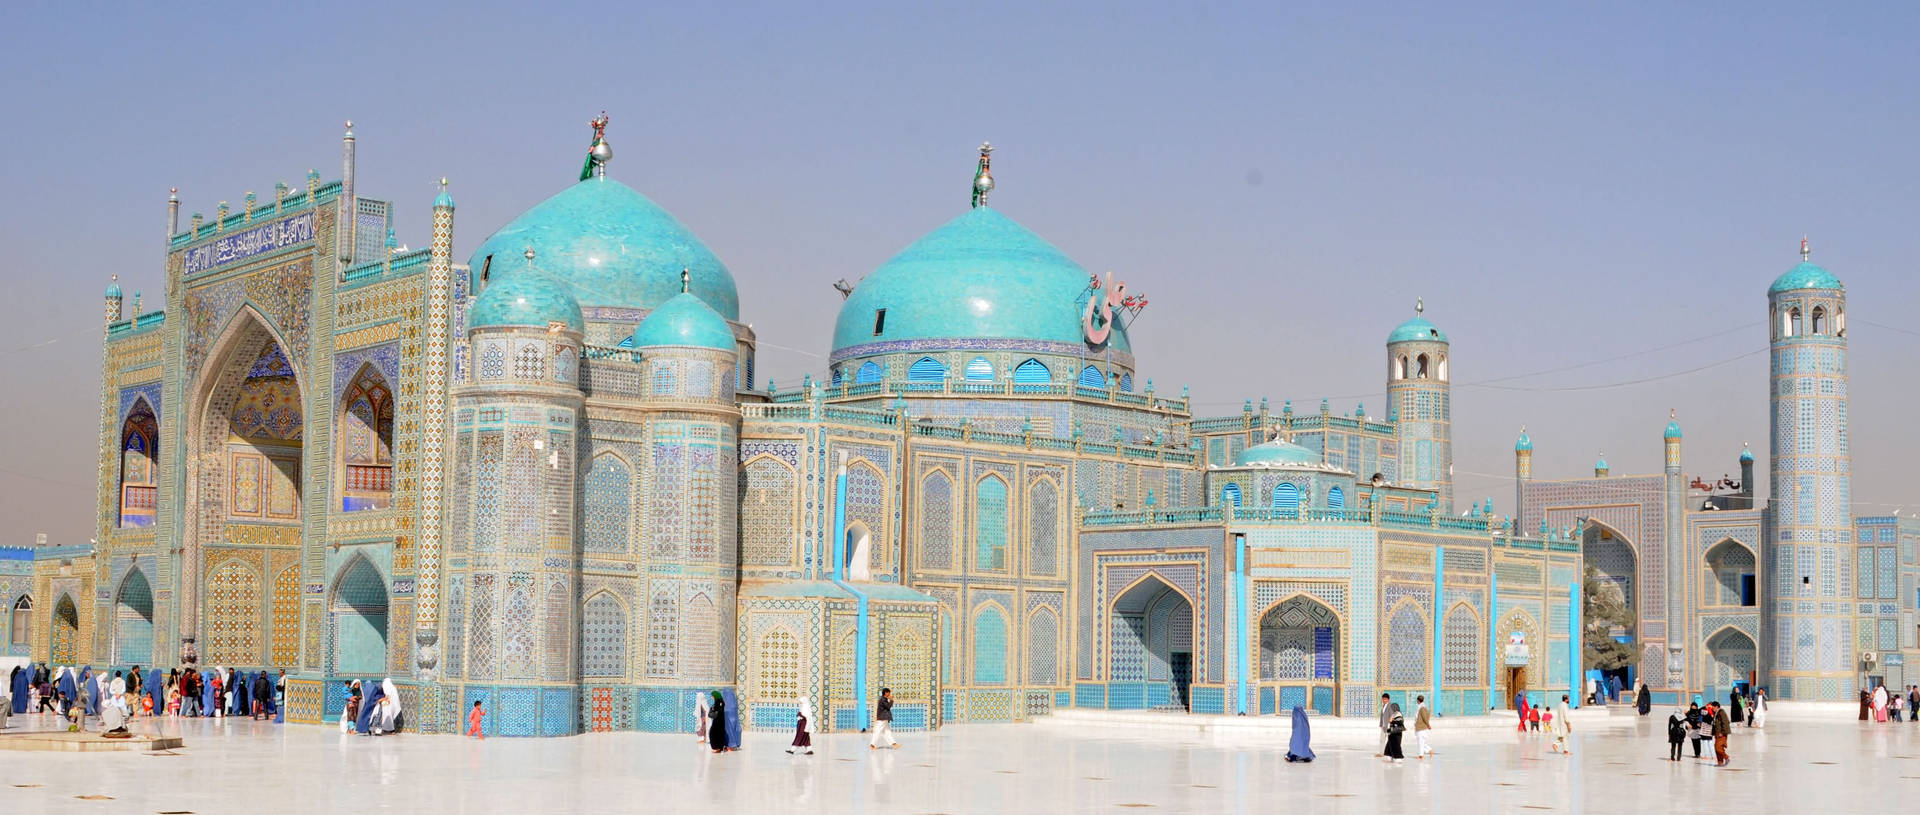 Majestic View of the Stunning Blue Mosque in Afghanistan Wallpaper